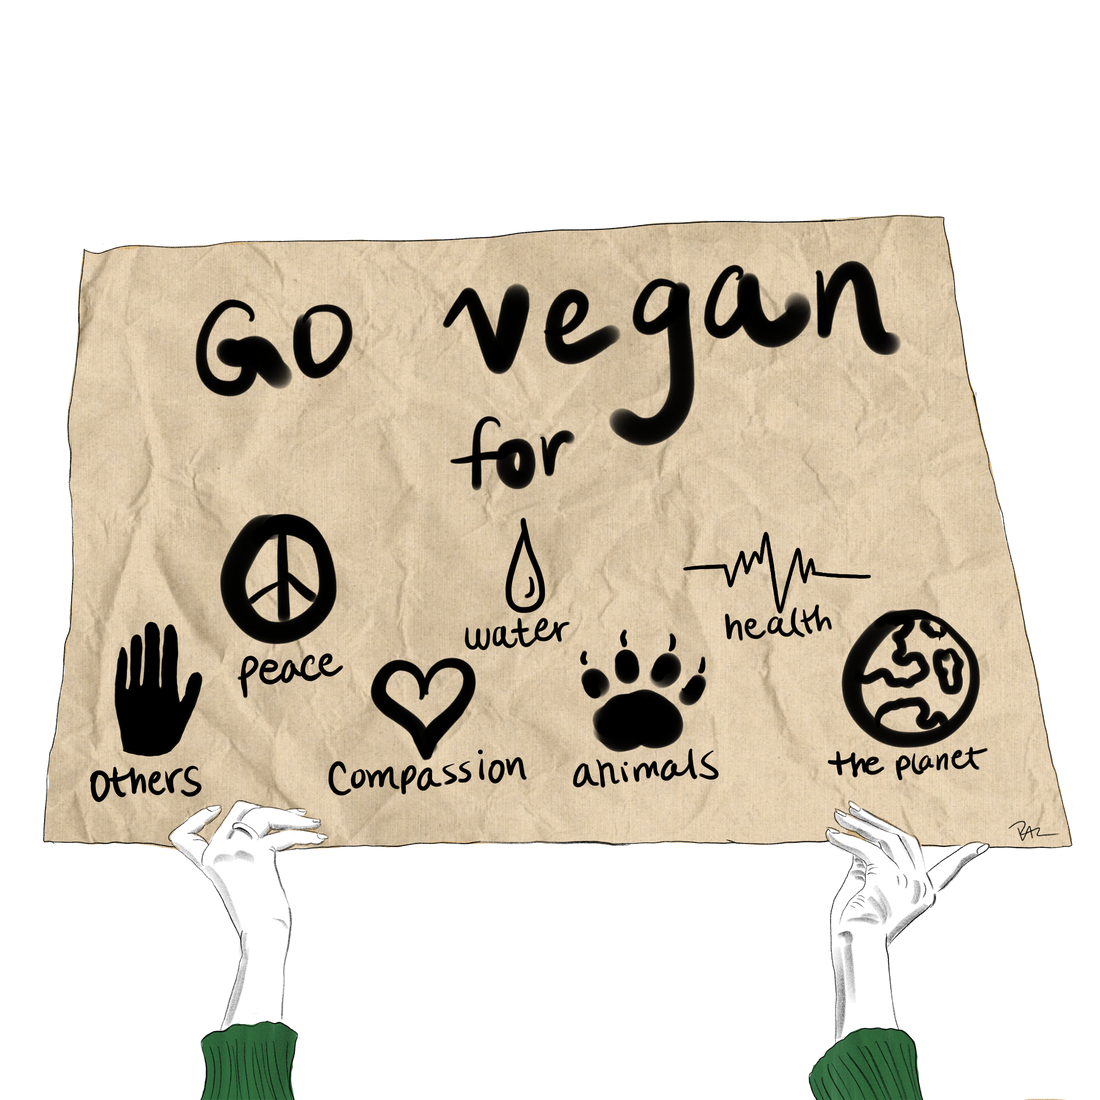 Embracing the Vegan Lifestyle: 10 Lessons In 10 Years